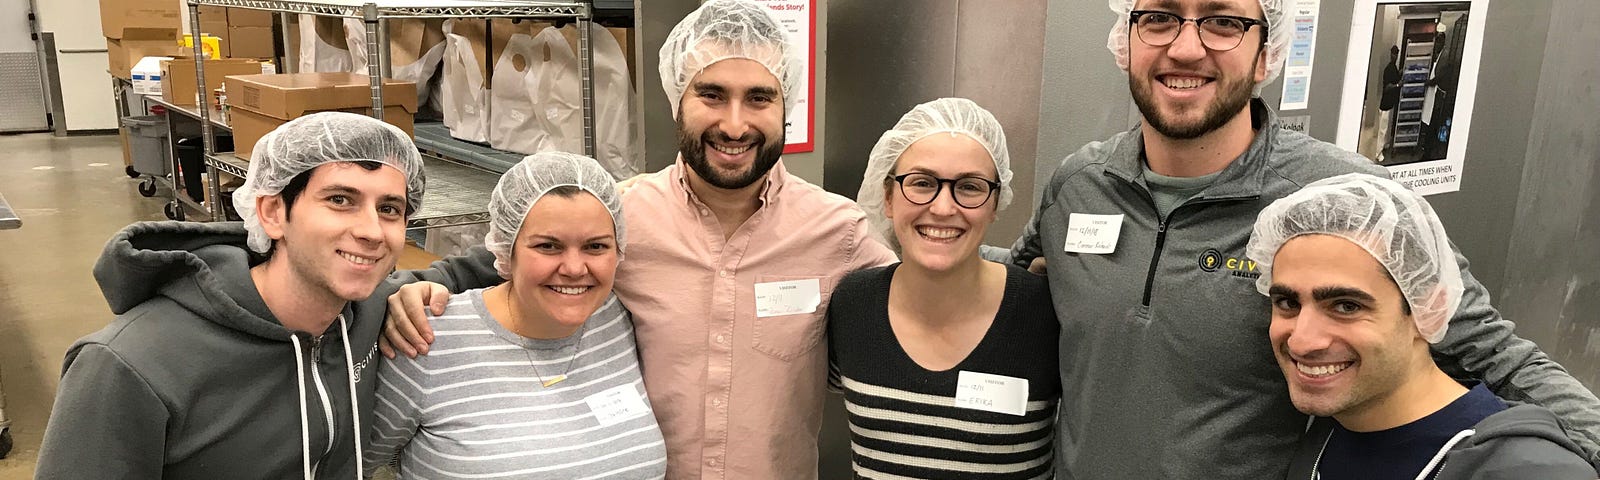 Civis employees in Washington D.C. volunteer day at Food and Friends